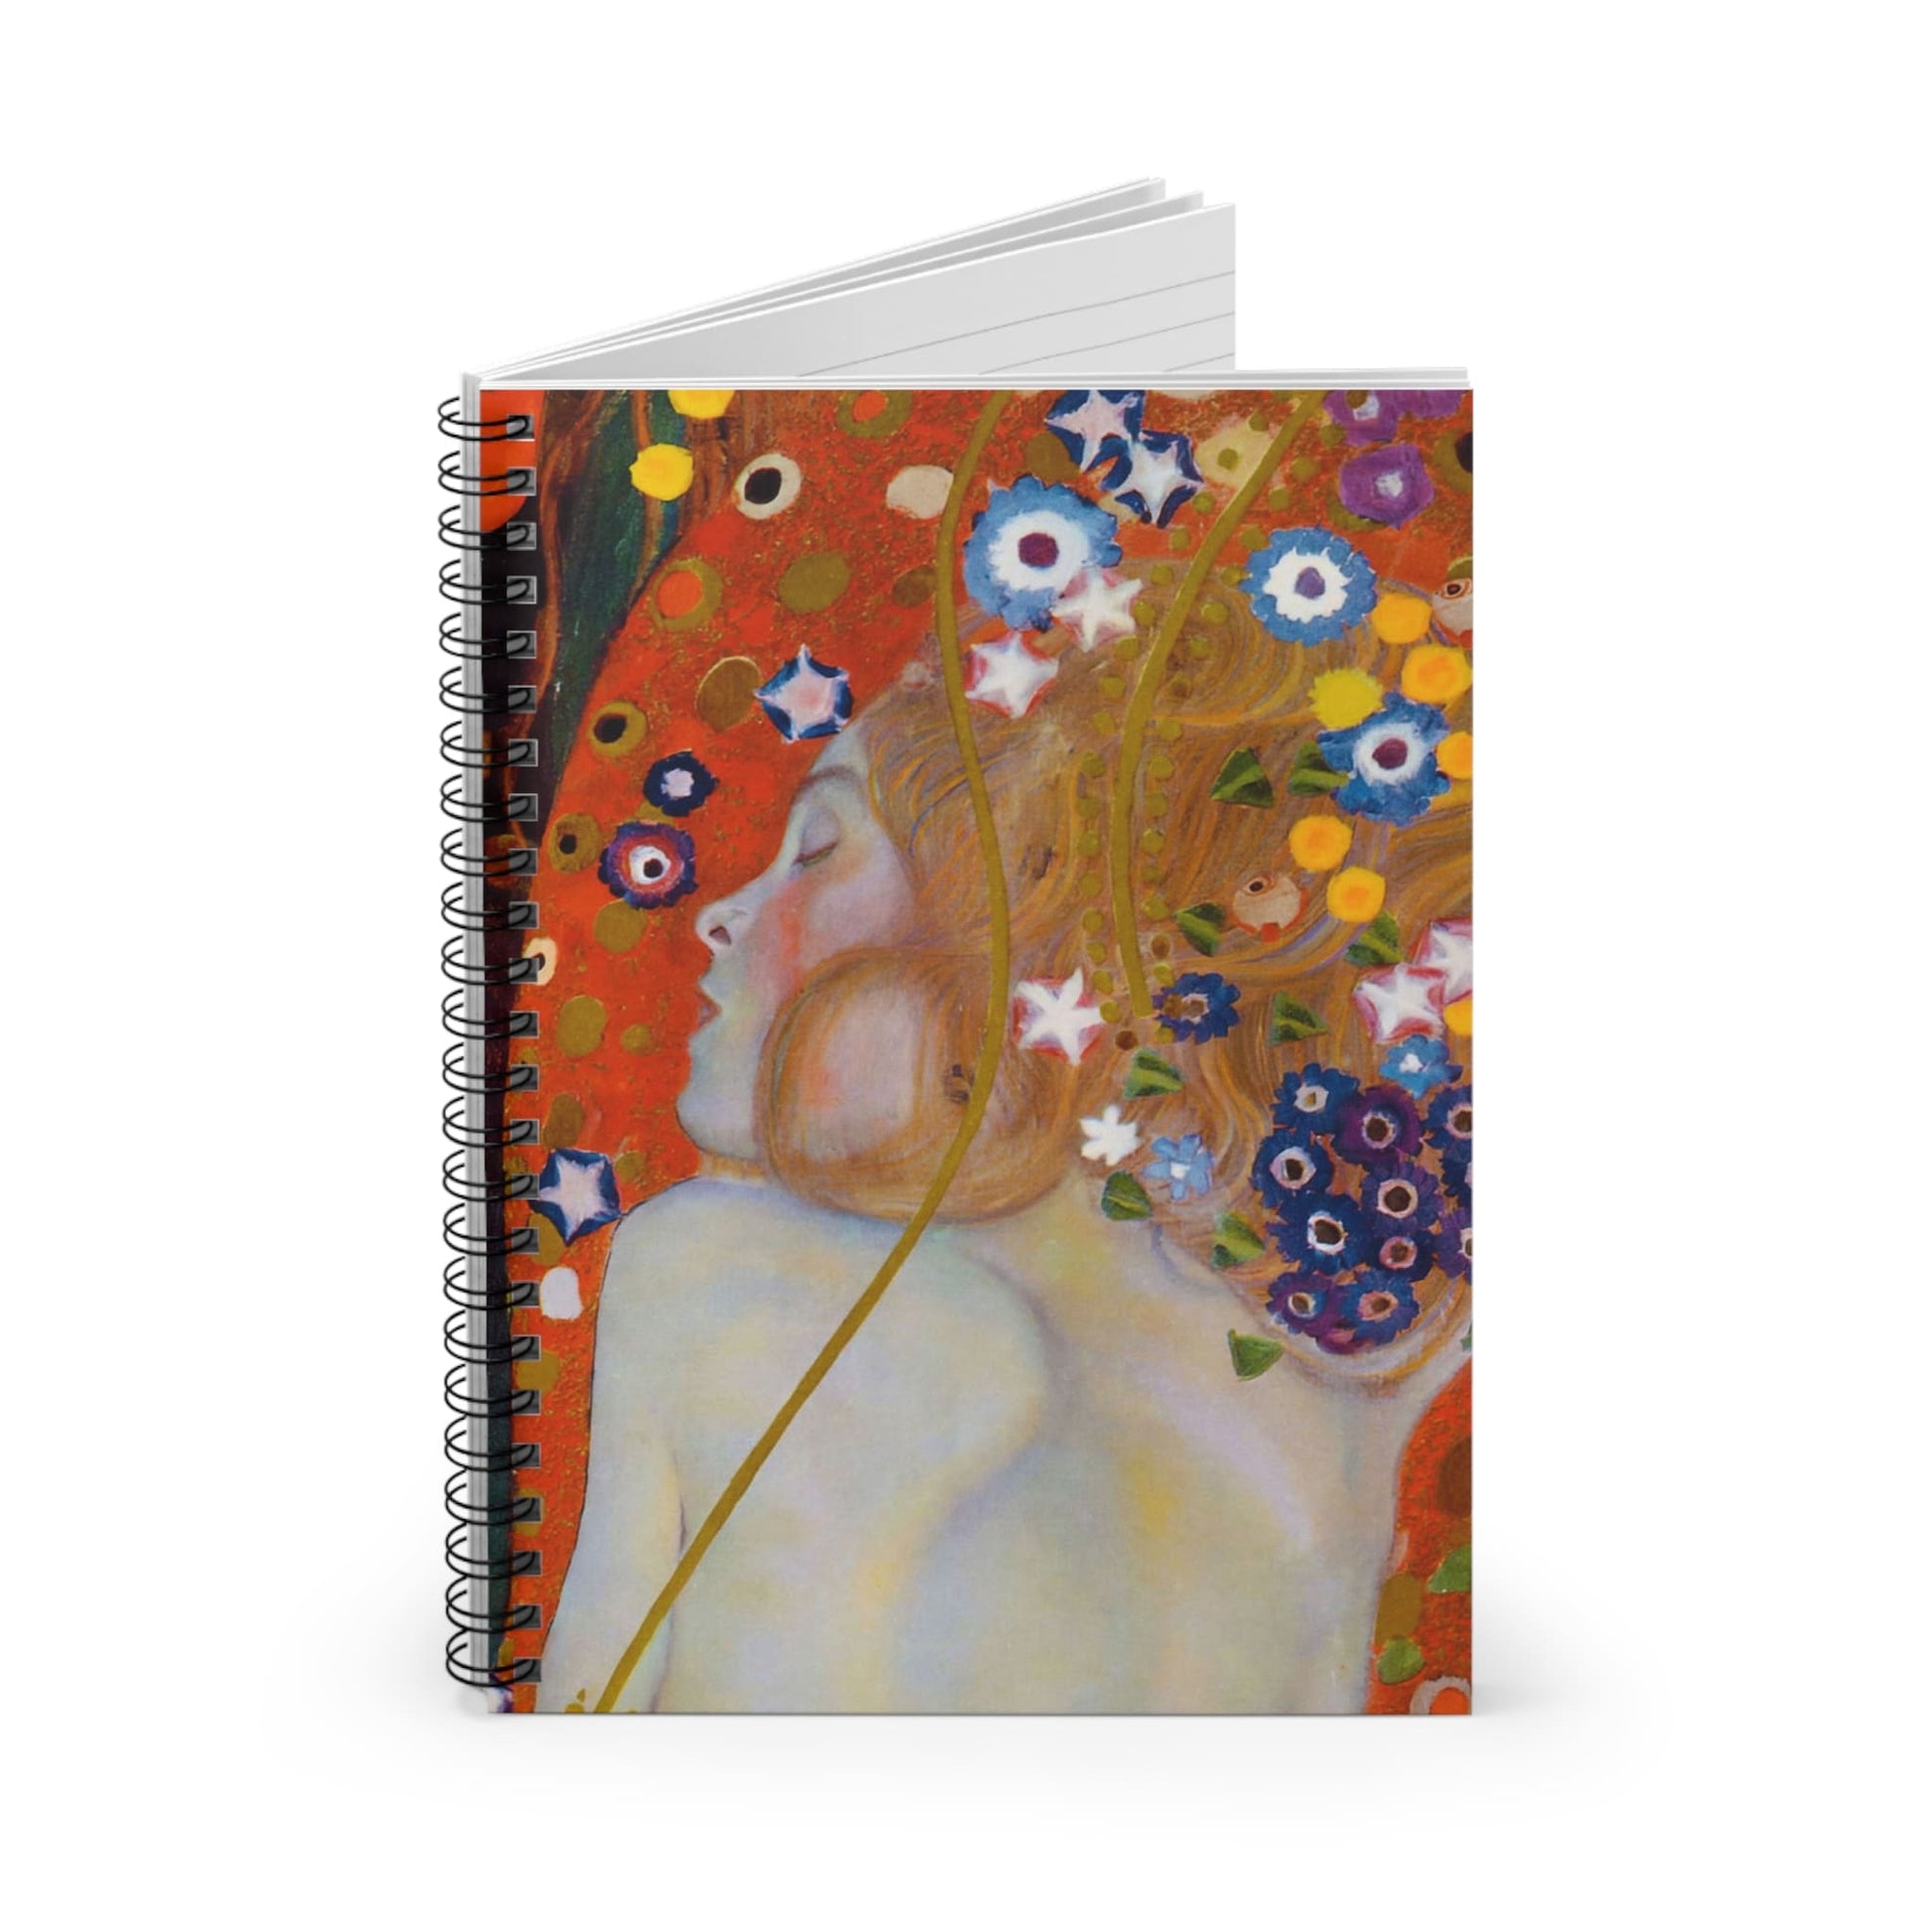 Woman with Flower Hair Spiral Notebook Standing up on White Desk